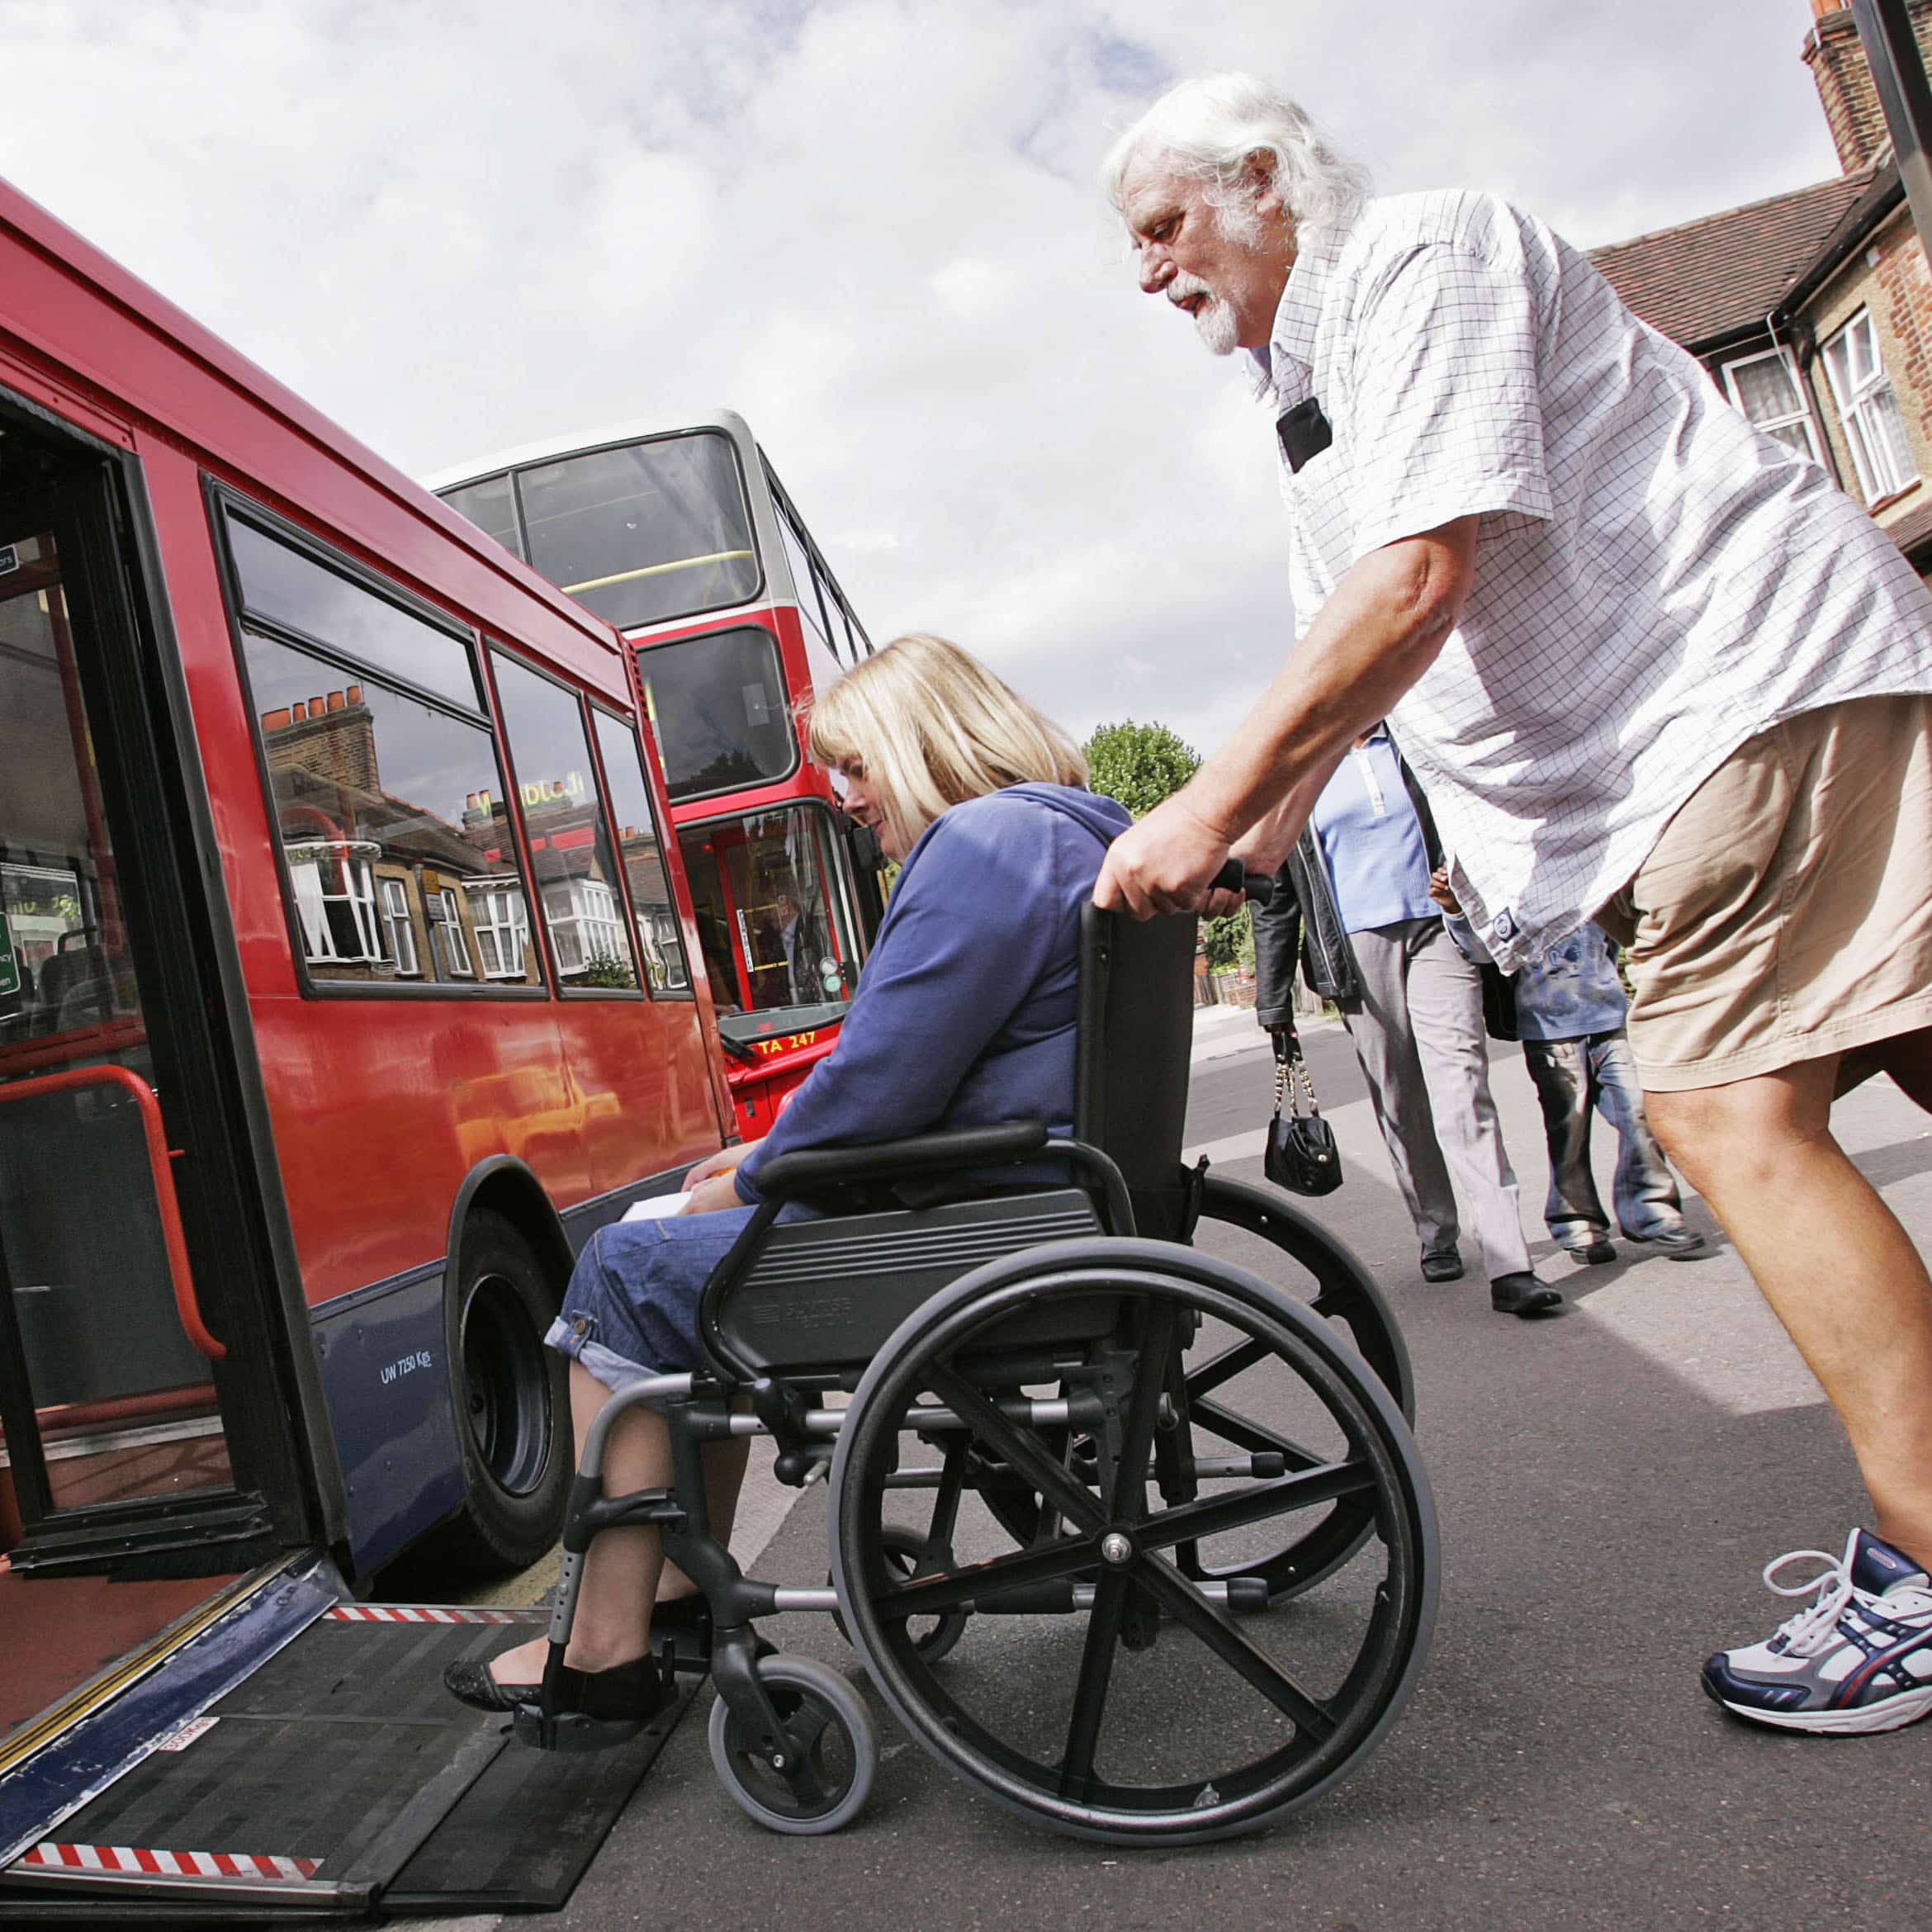 Transport: Accessible and inclusive for all?